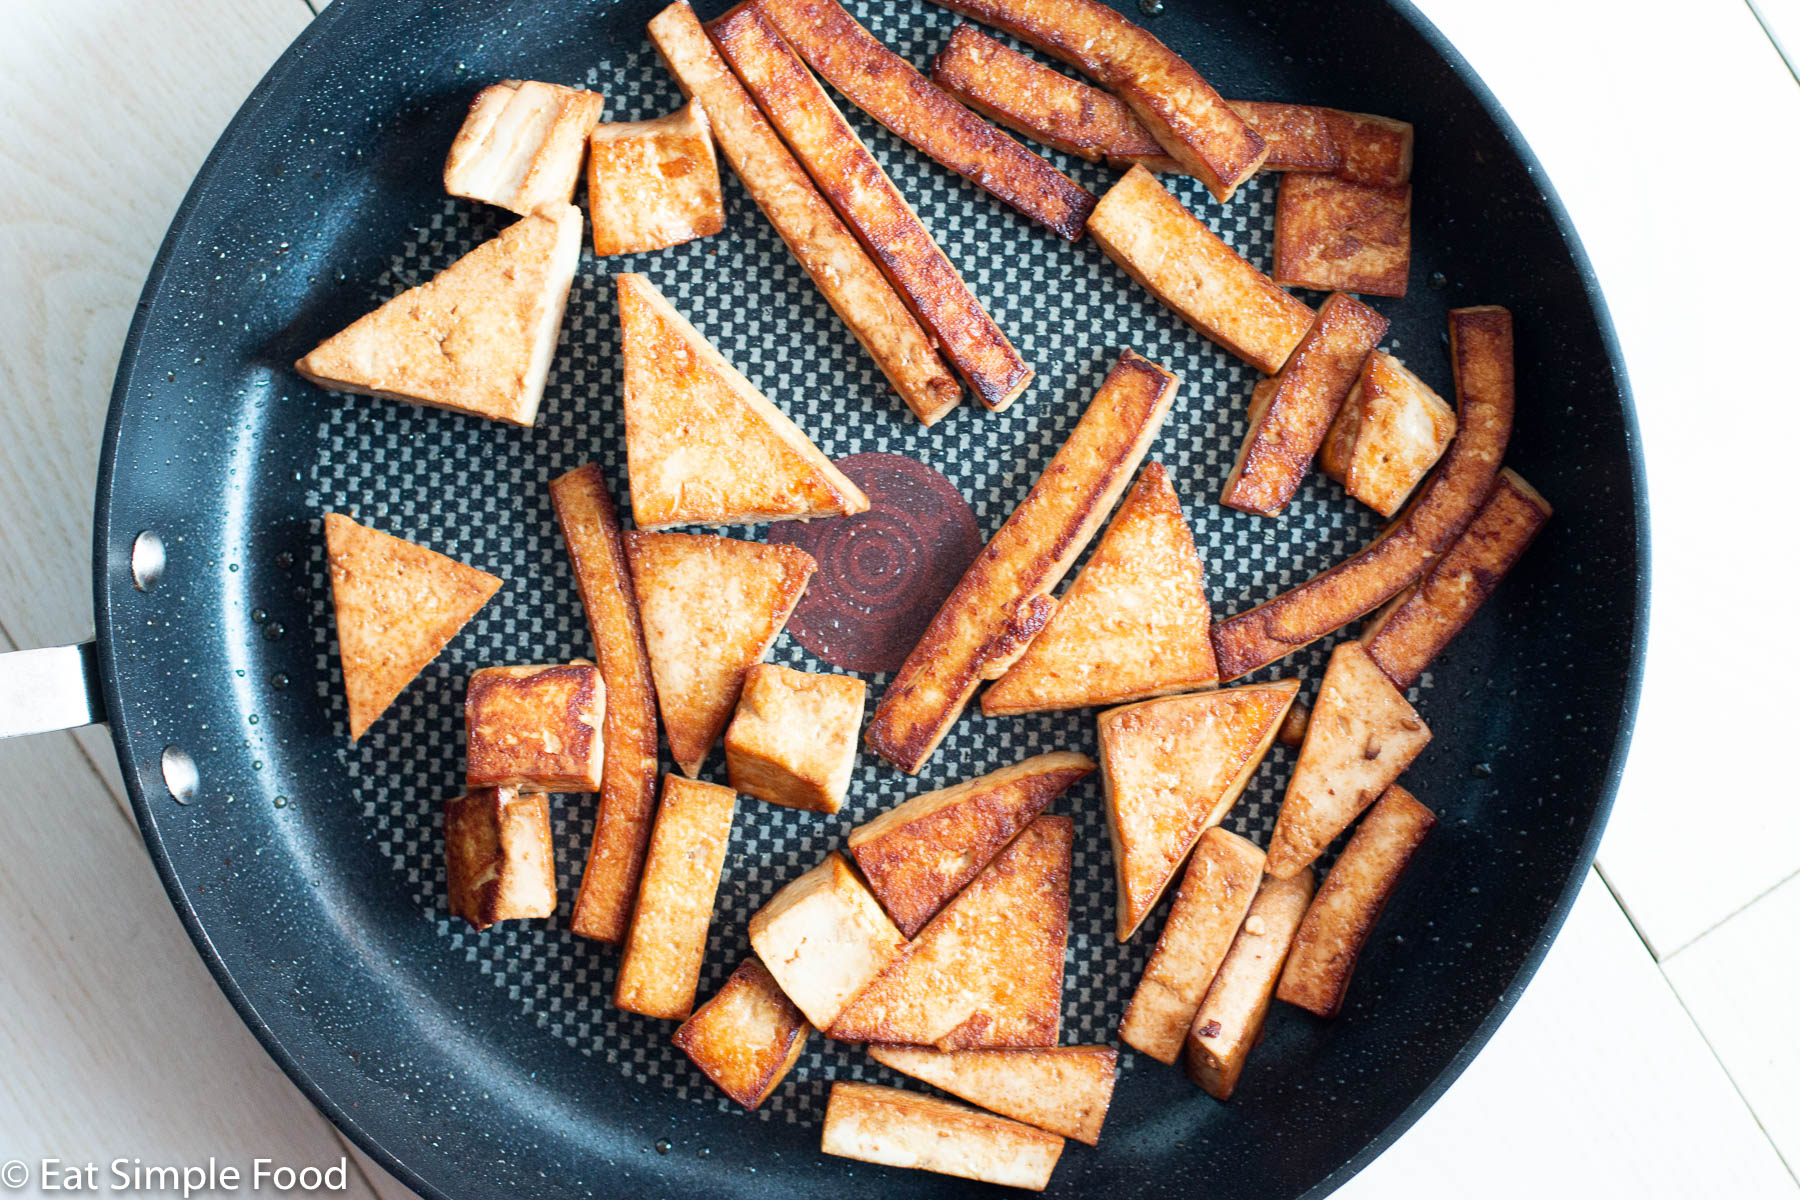 Pan fried and browned cooked tofu in a different shapes (wedges, cubes, slices, triangles) in a dark non stick pan. Top view.